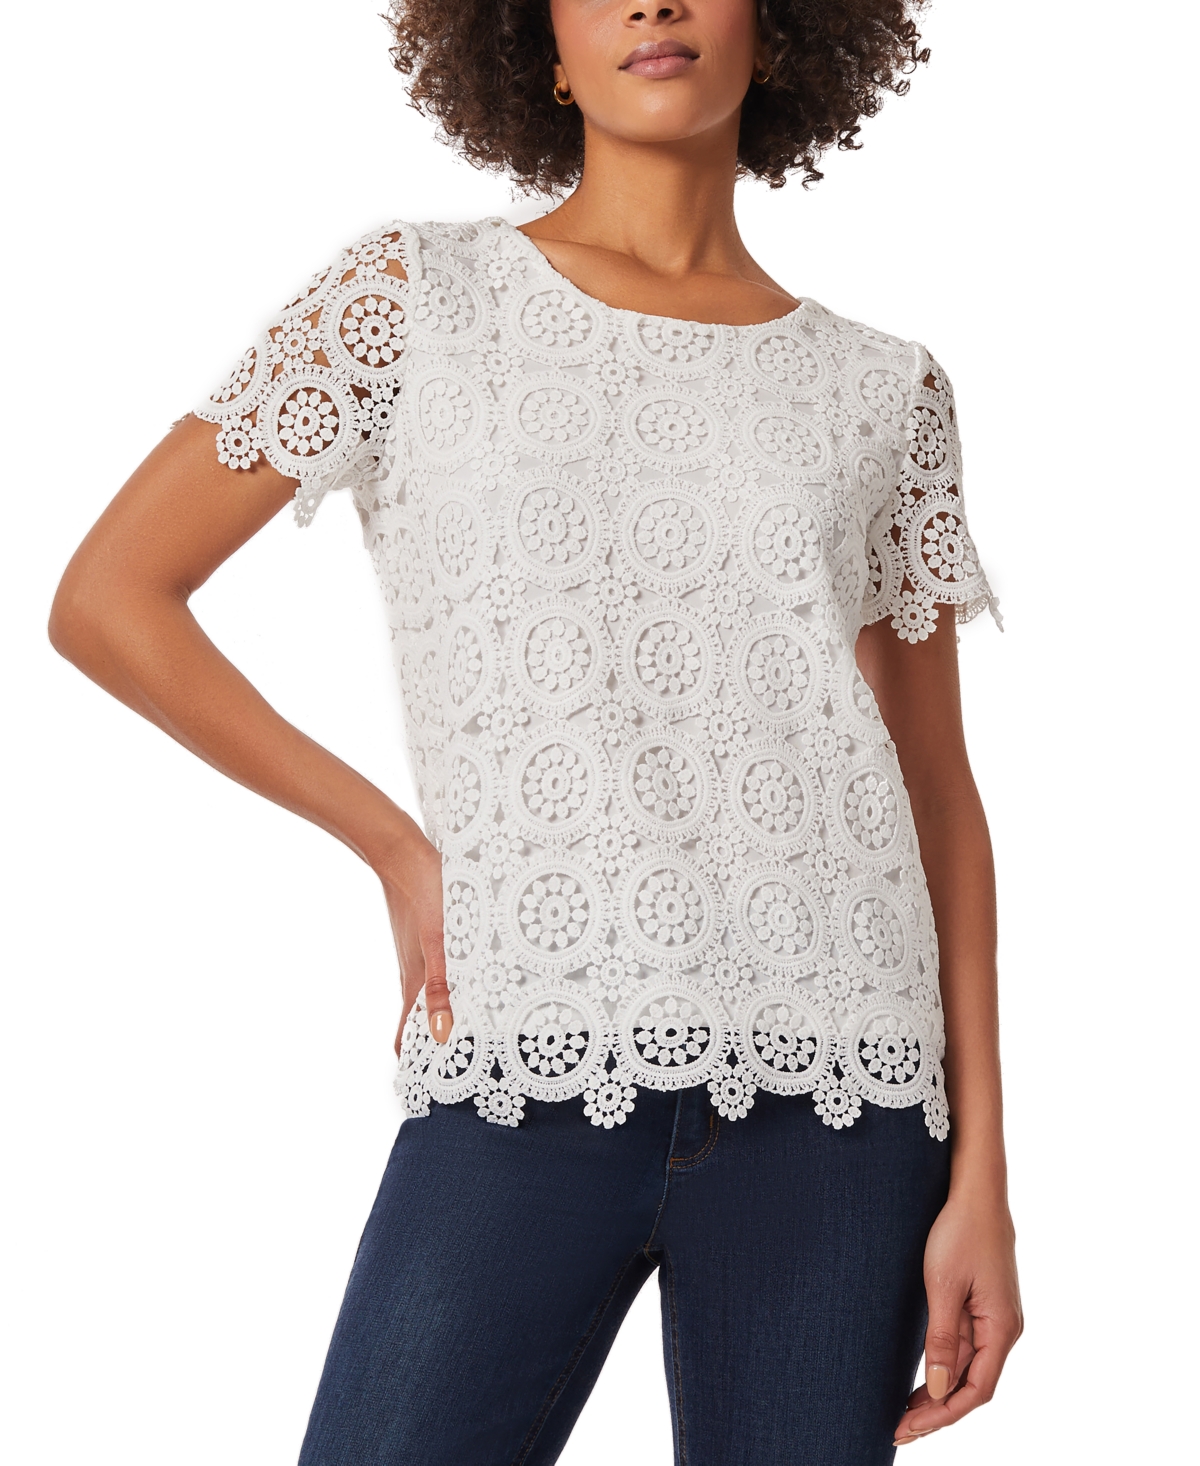 Women's Short-Sleeve Relaxed-Fit Lace Top - NYC White